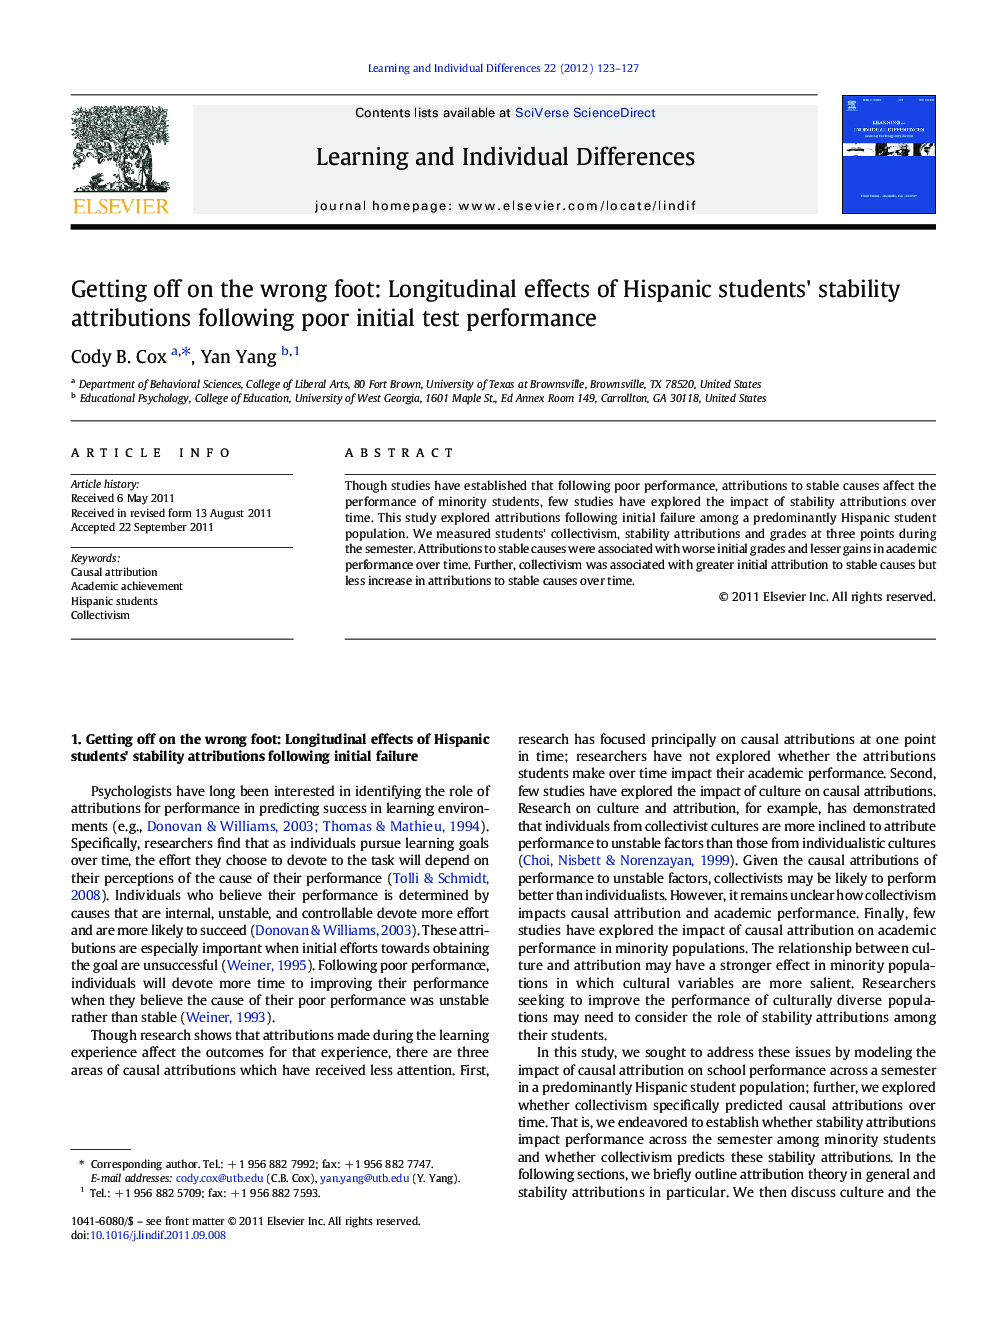 Getting off on the wrong foot: Longitudinal effects of Hispanic students' stability attributions following poor initial test performance